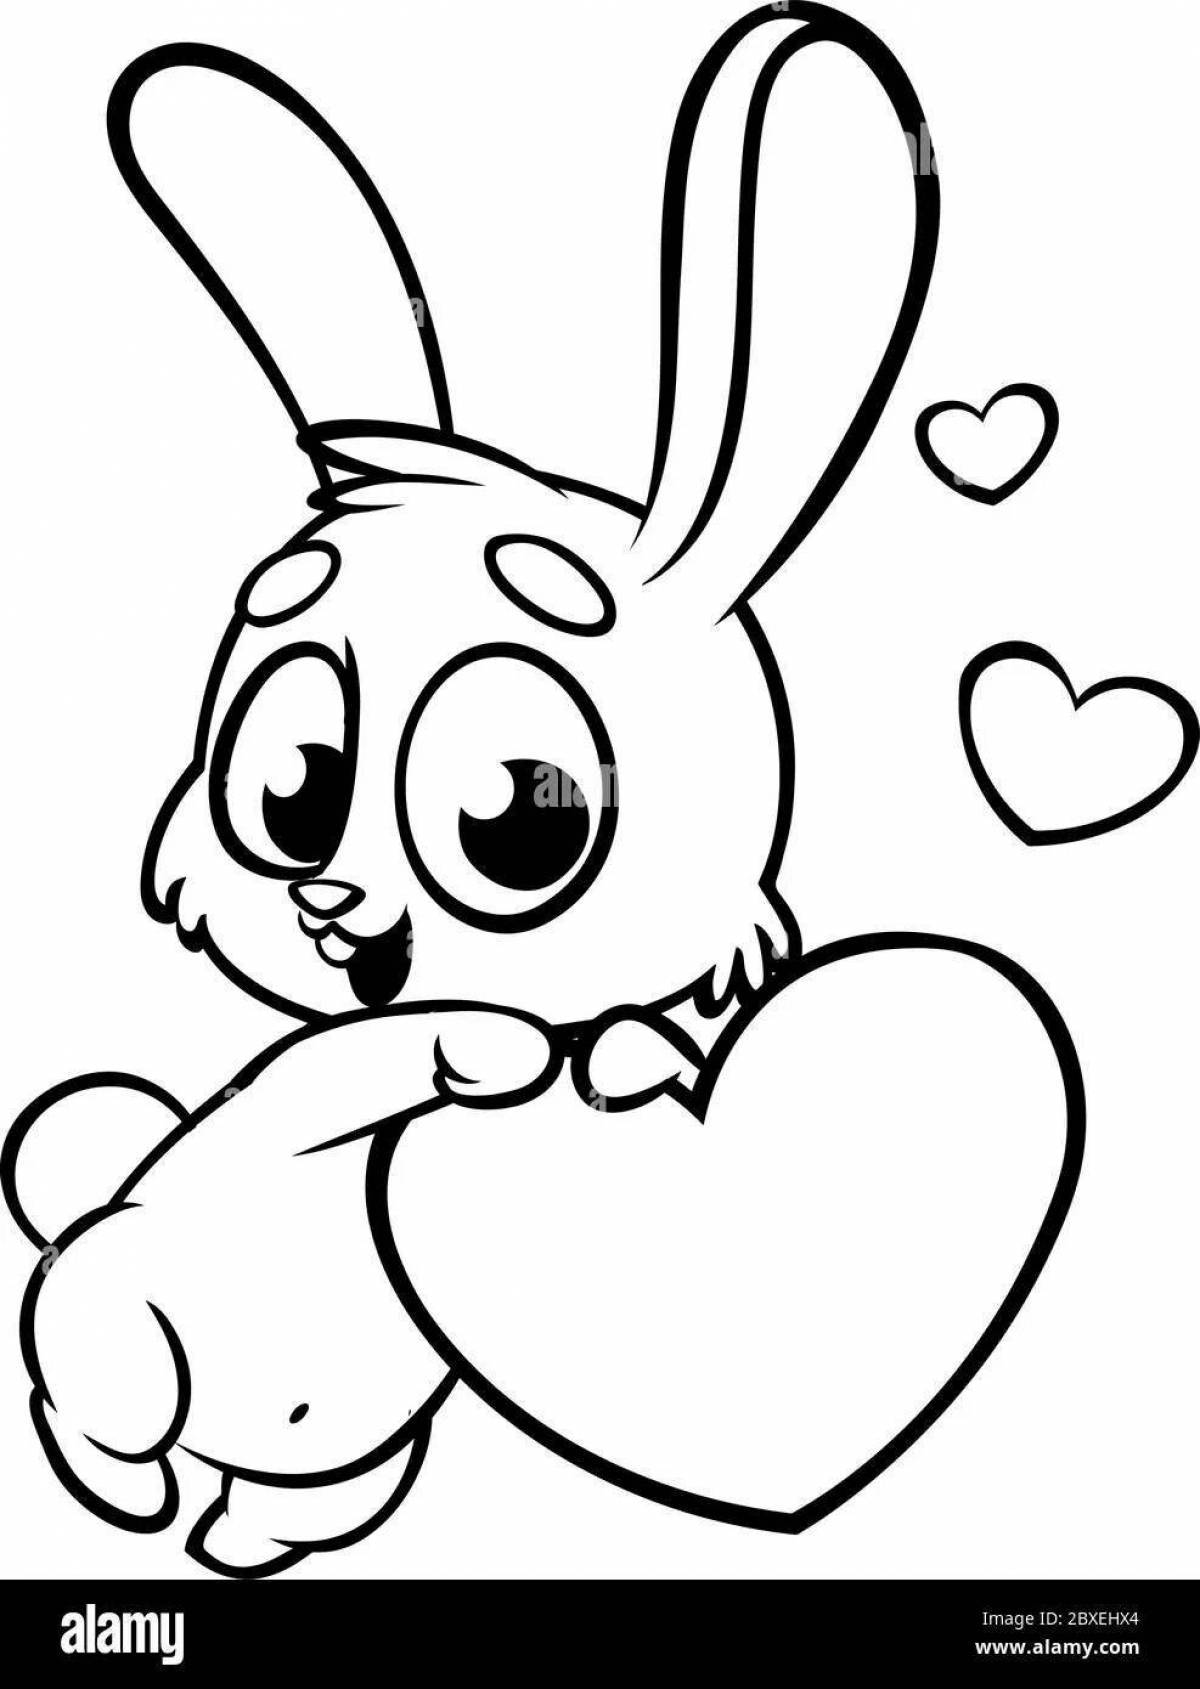 Colouring serene rabbit with a heart